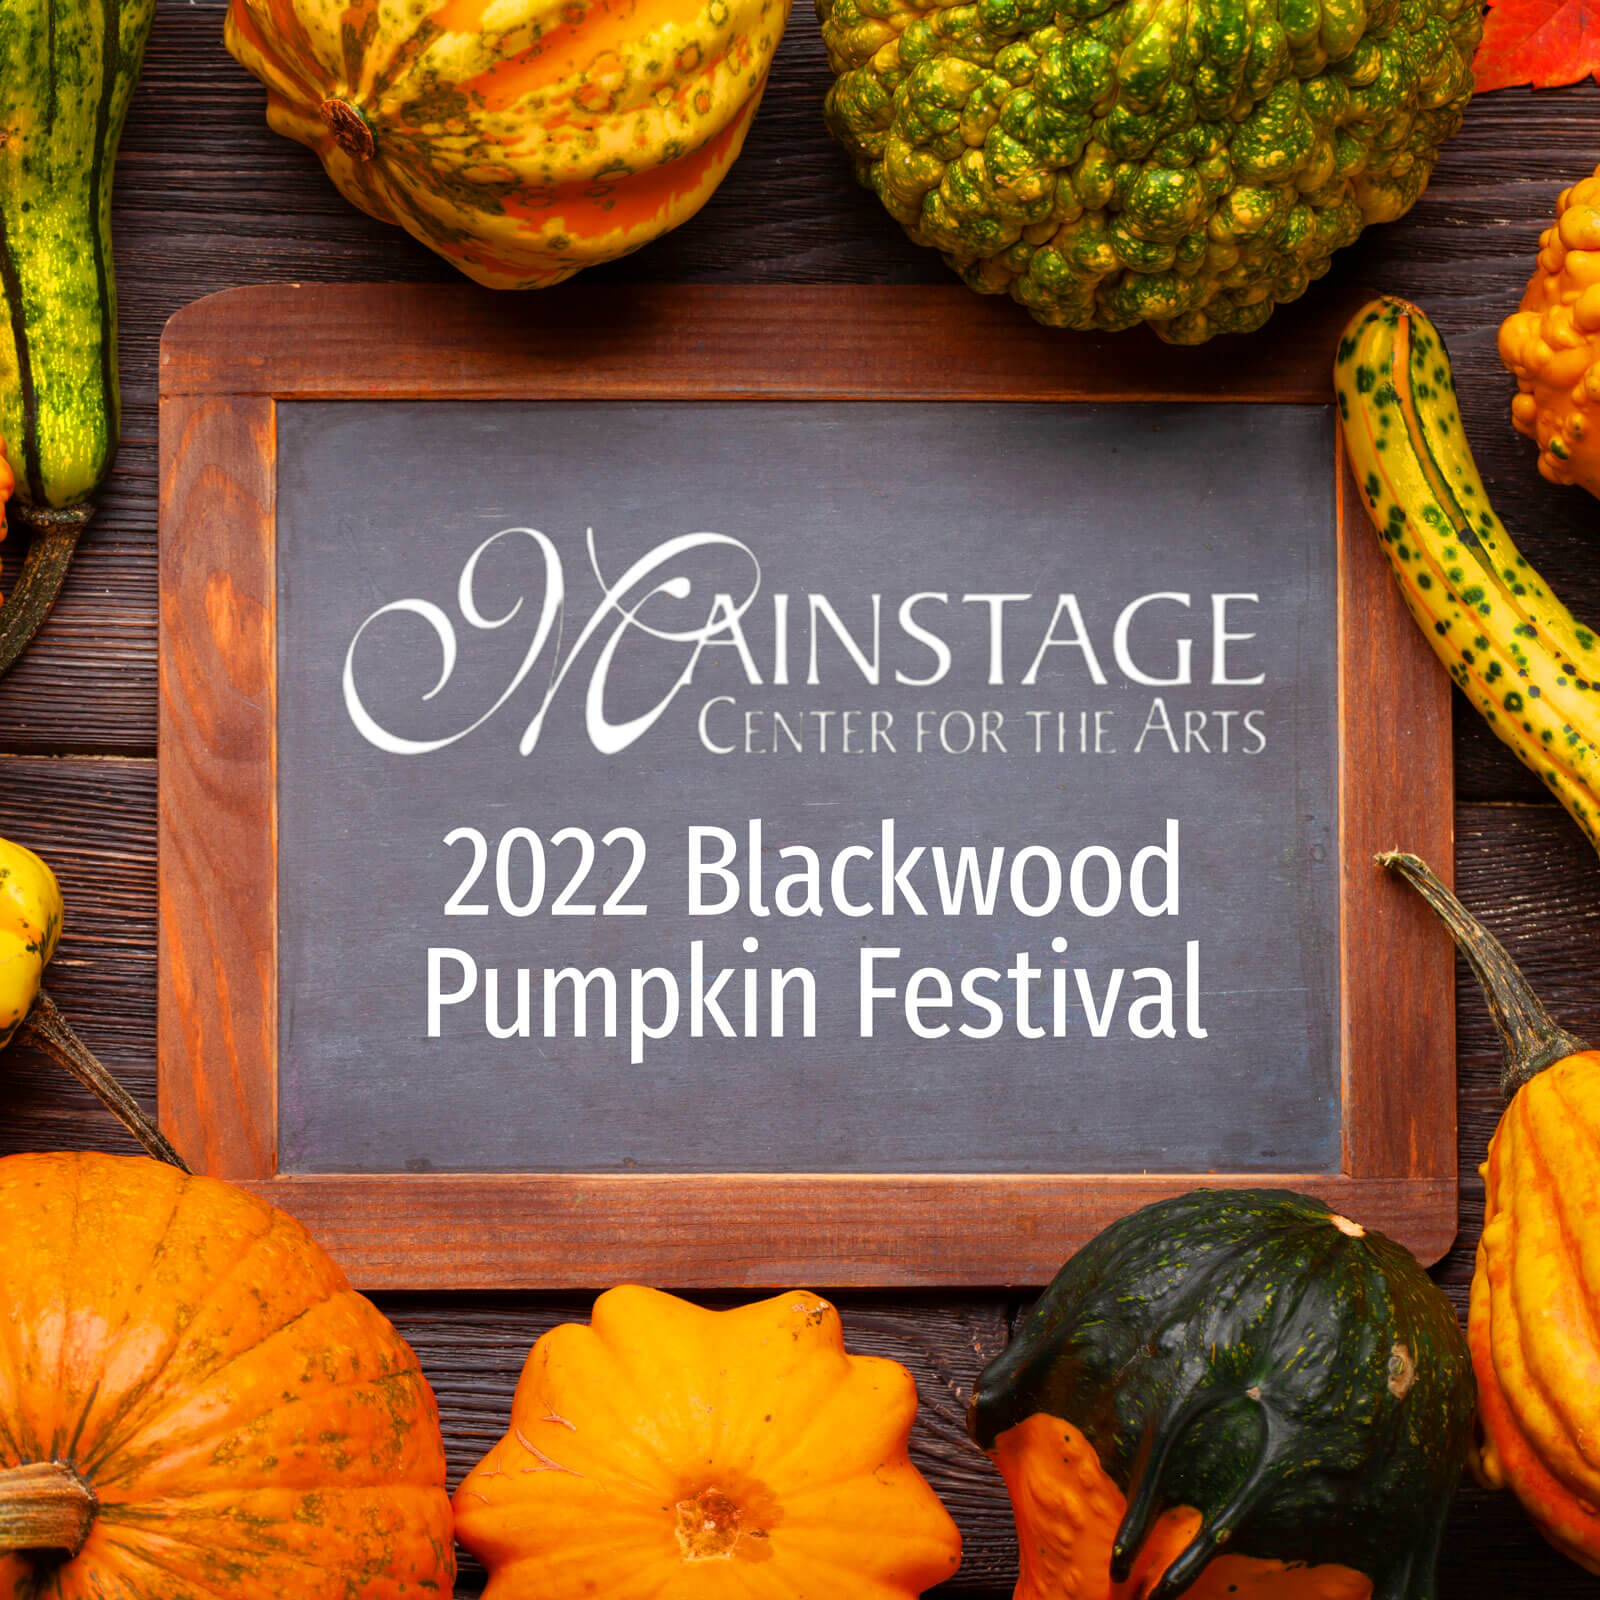 29th Annual Blackwood Pumpkin Festival by Mainstage Center for the Arts